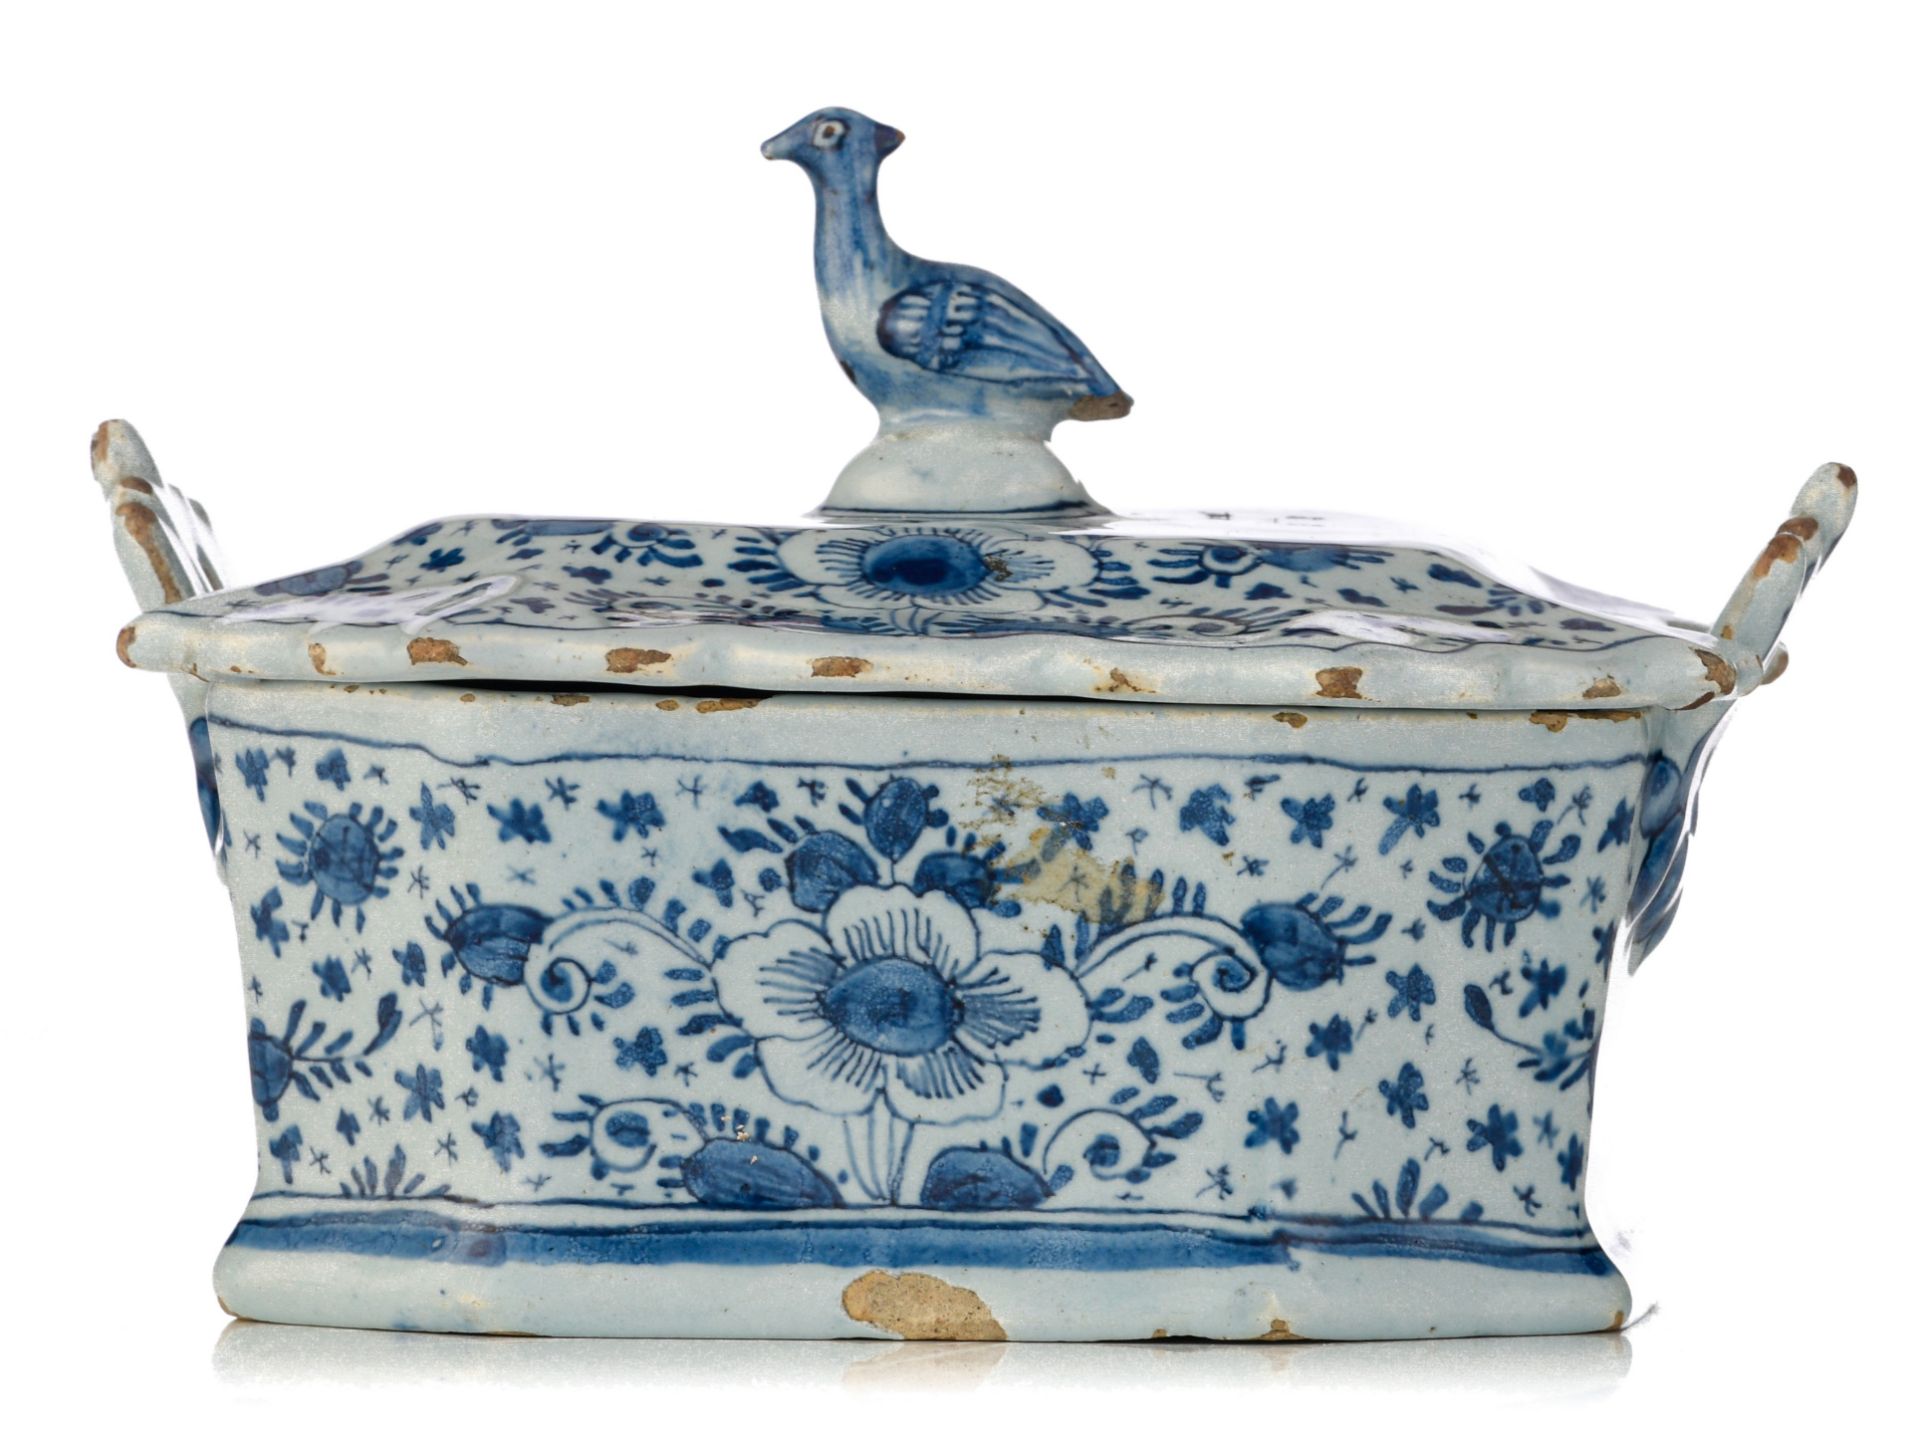 (BIDDING ONLY ON CARLOBONTE.BE) A fine Delft blue and white butter tub, marked 'De Lampetkan', 18thC - Image 4 of 14